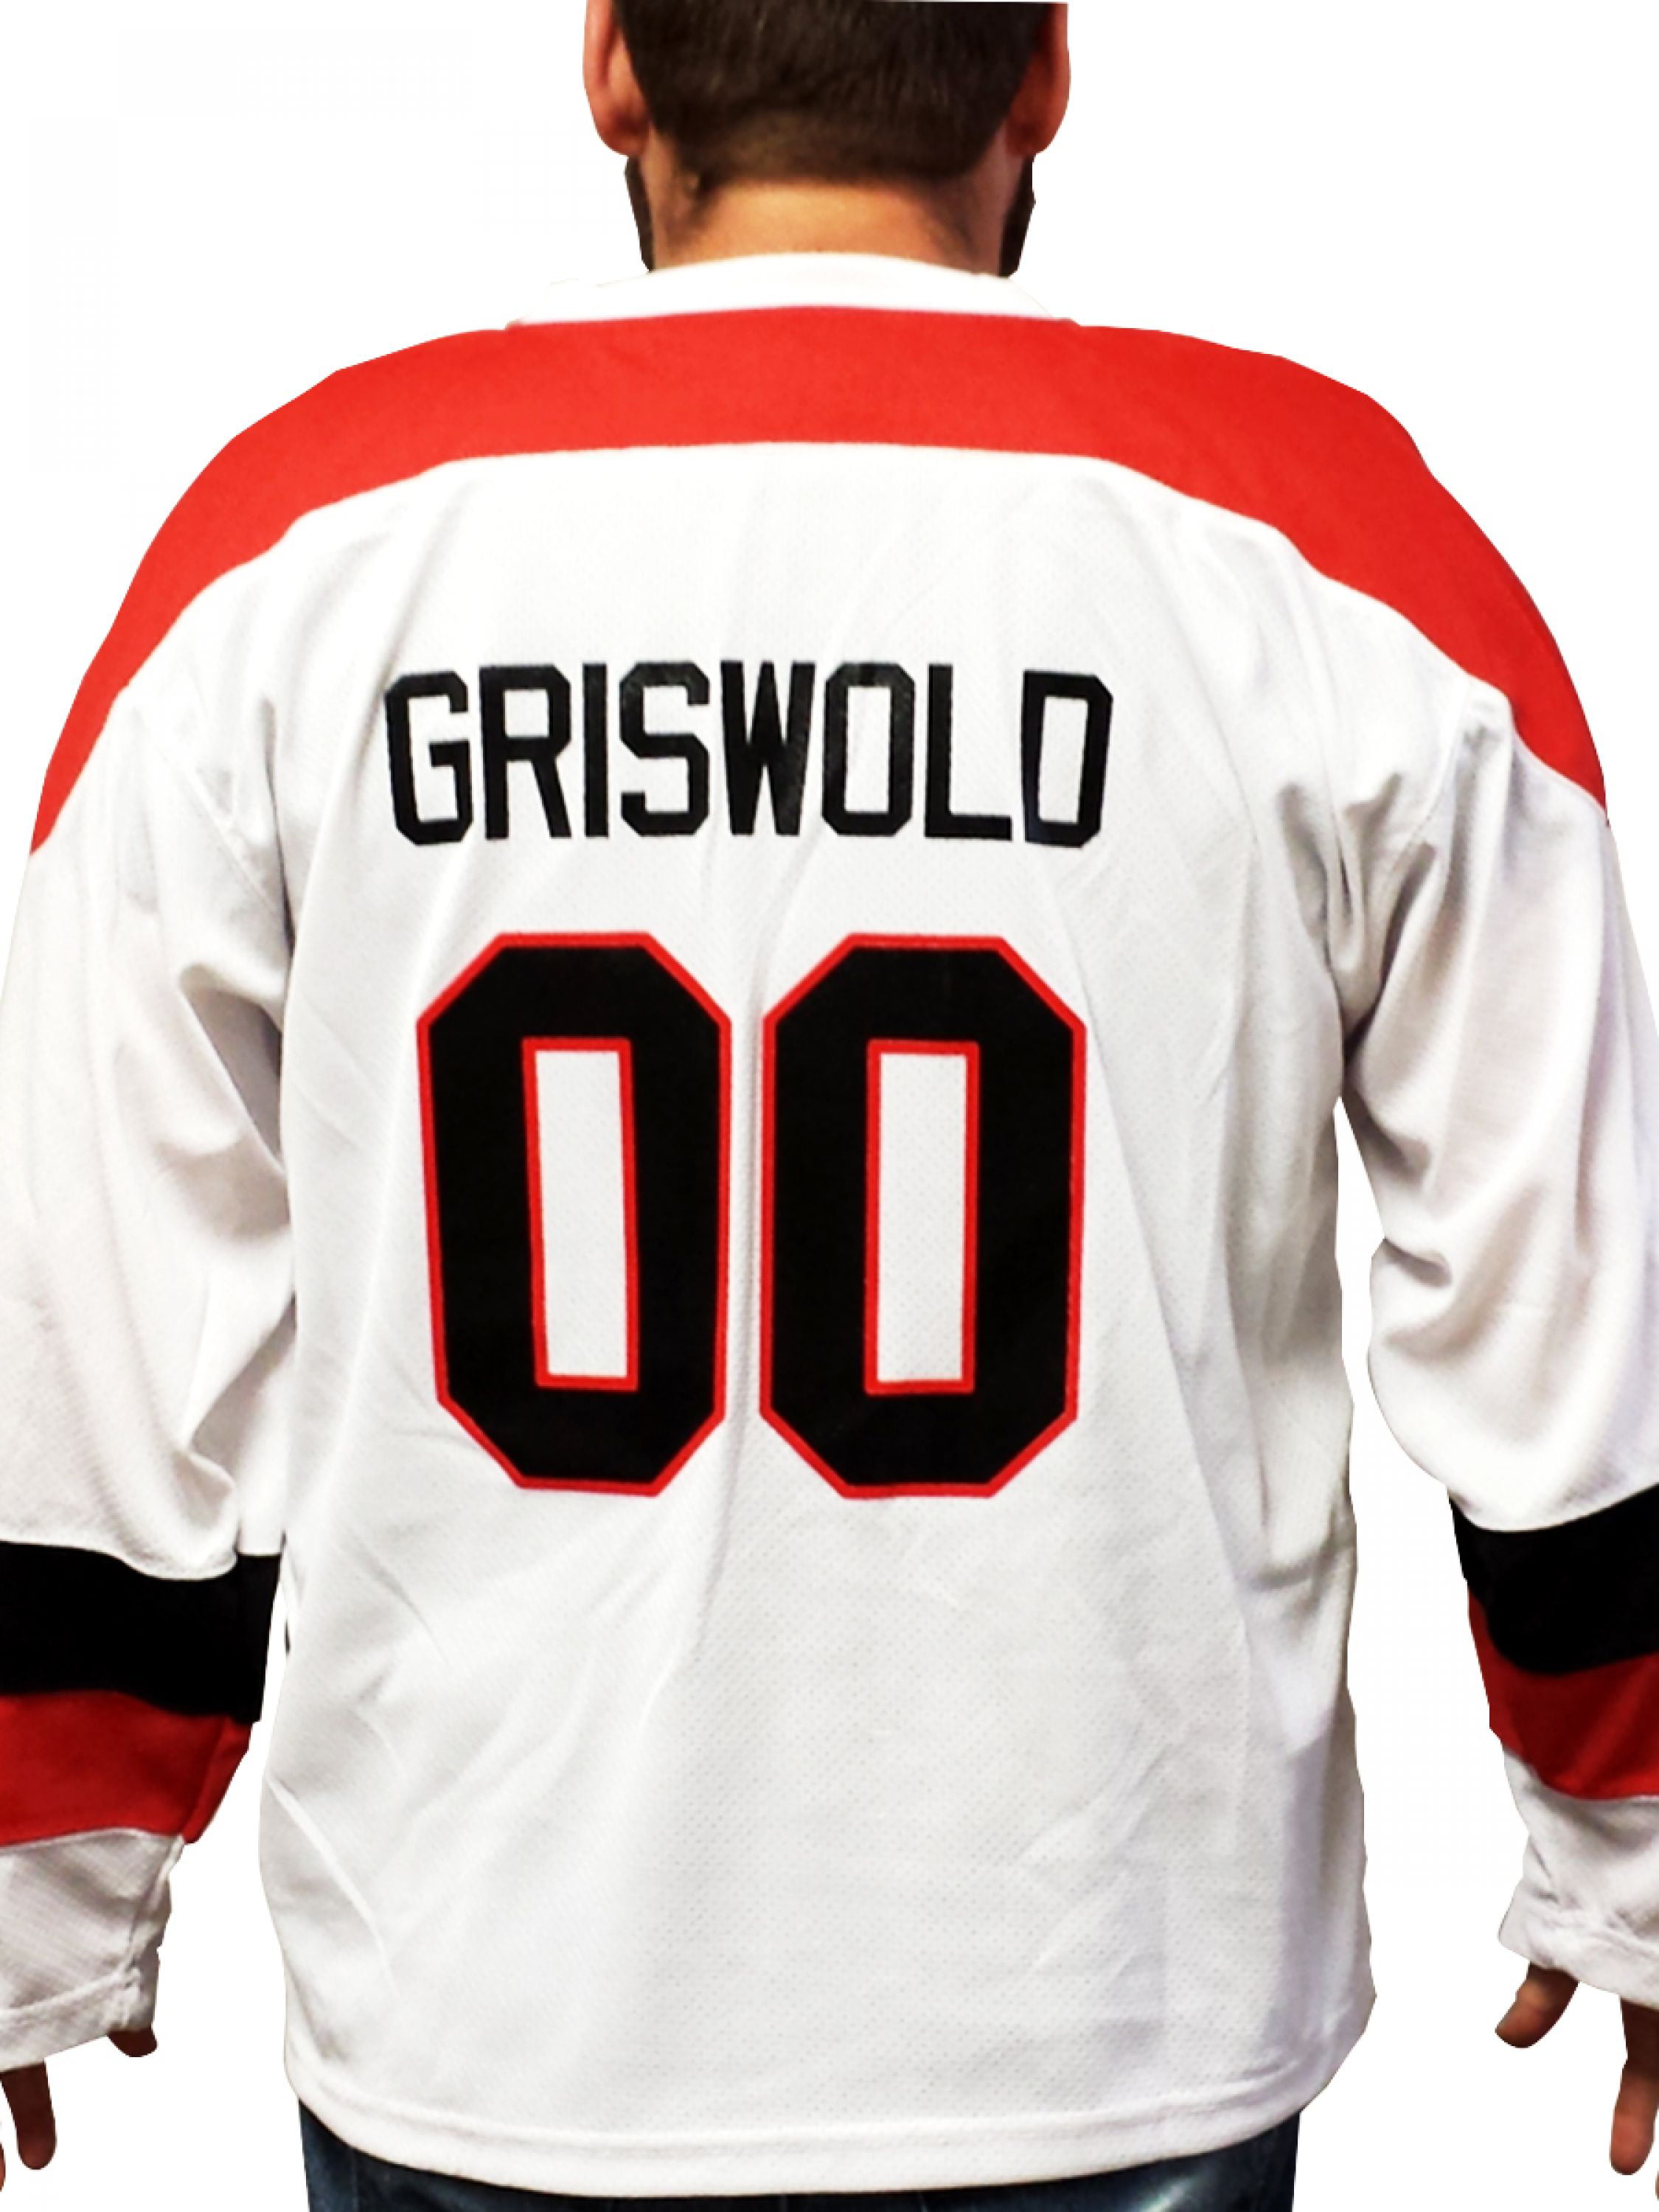 Clark Griswold 00 Chicago Alternate Hockey Jersey Free Shipping